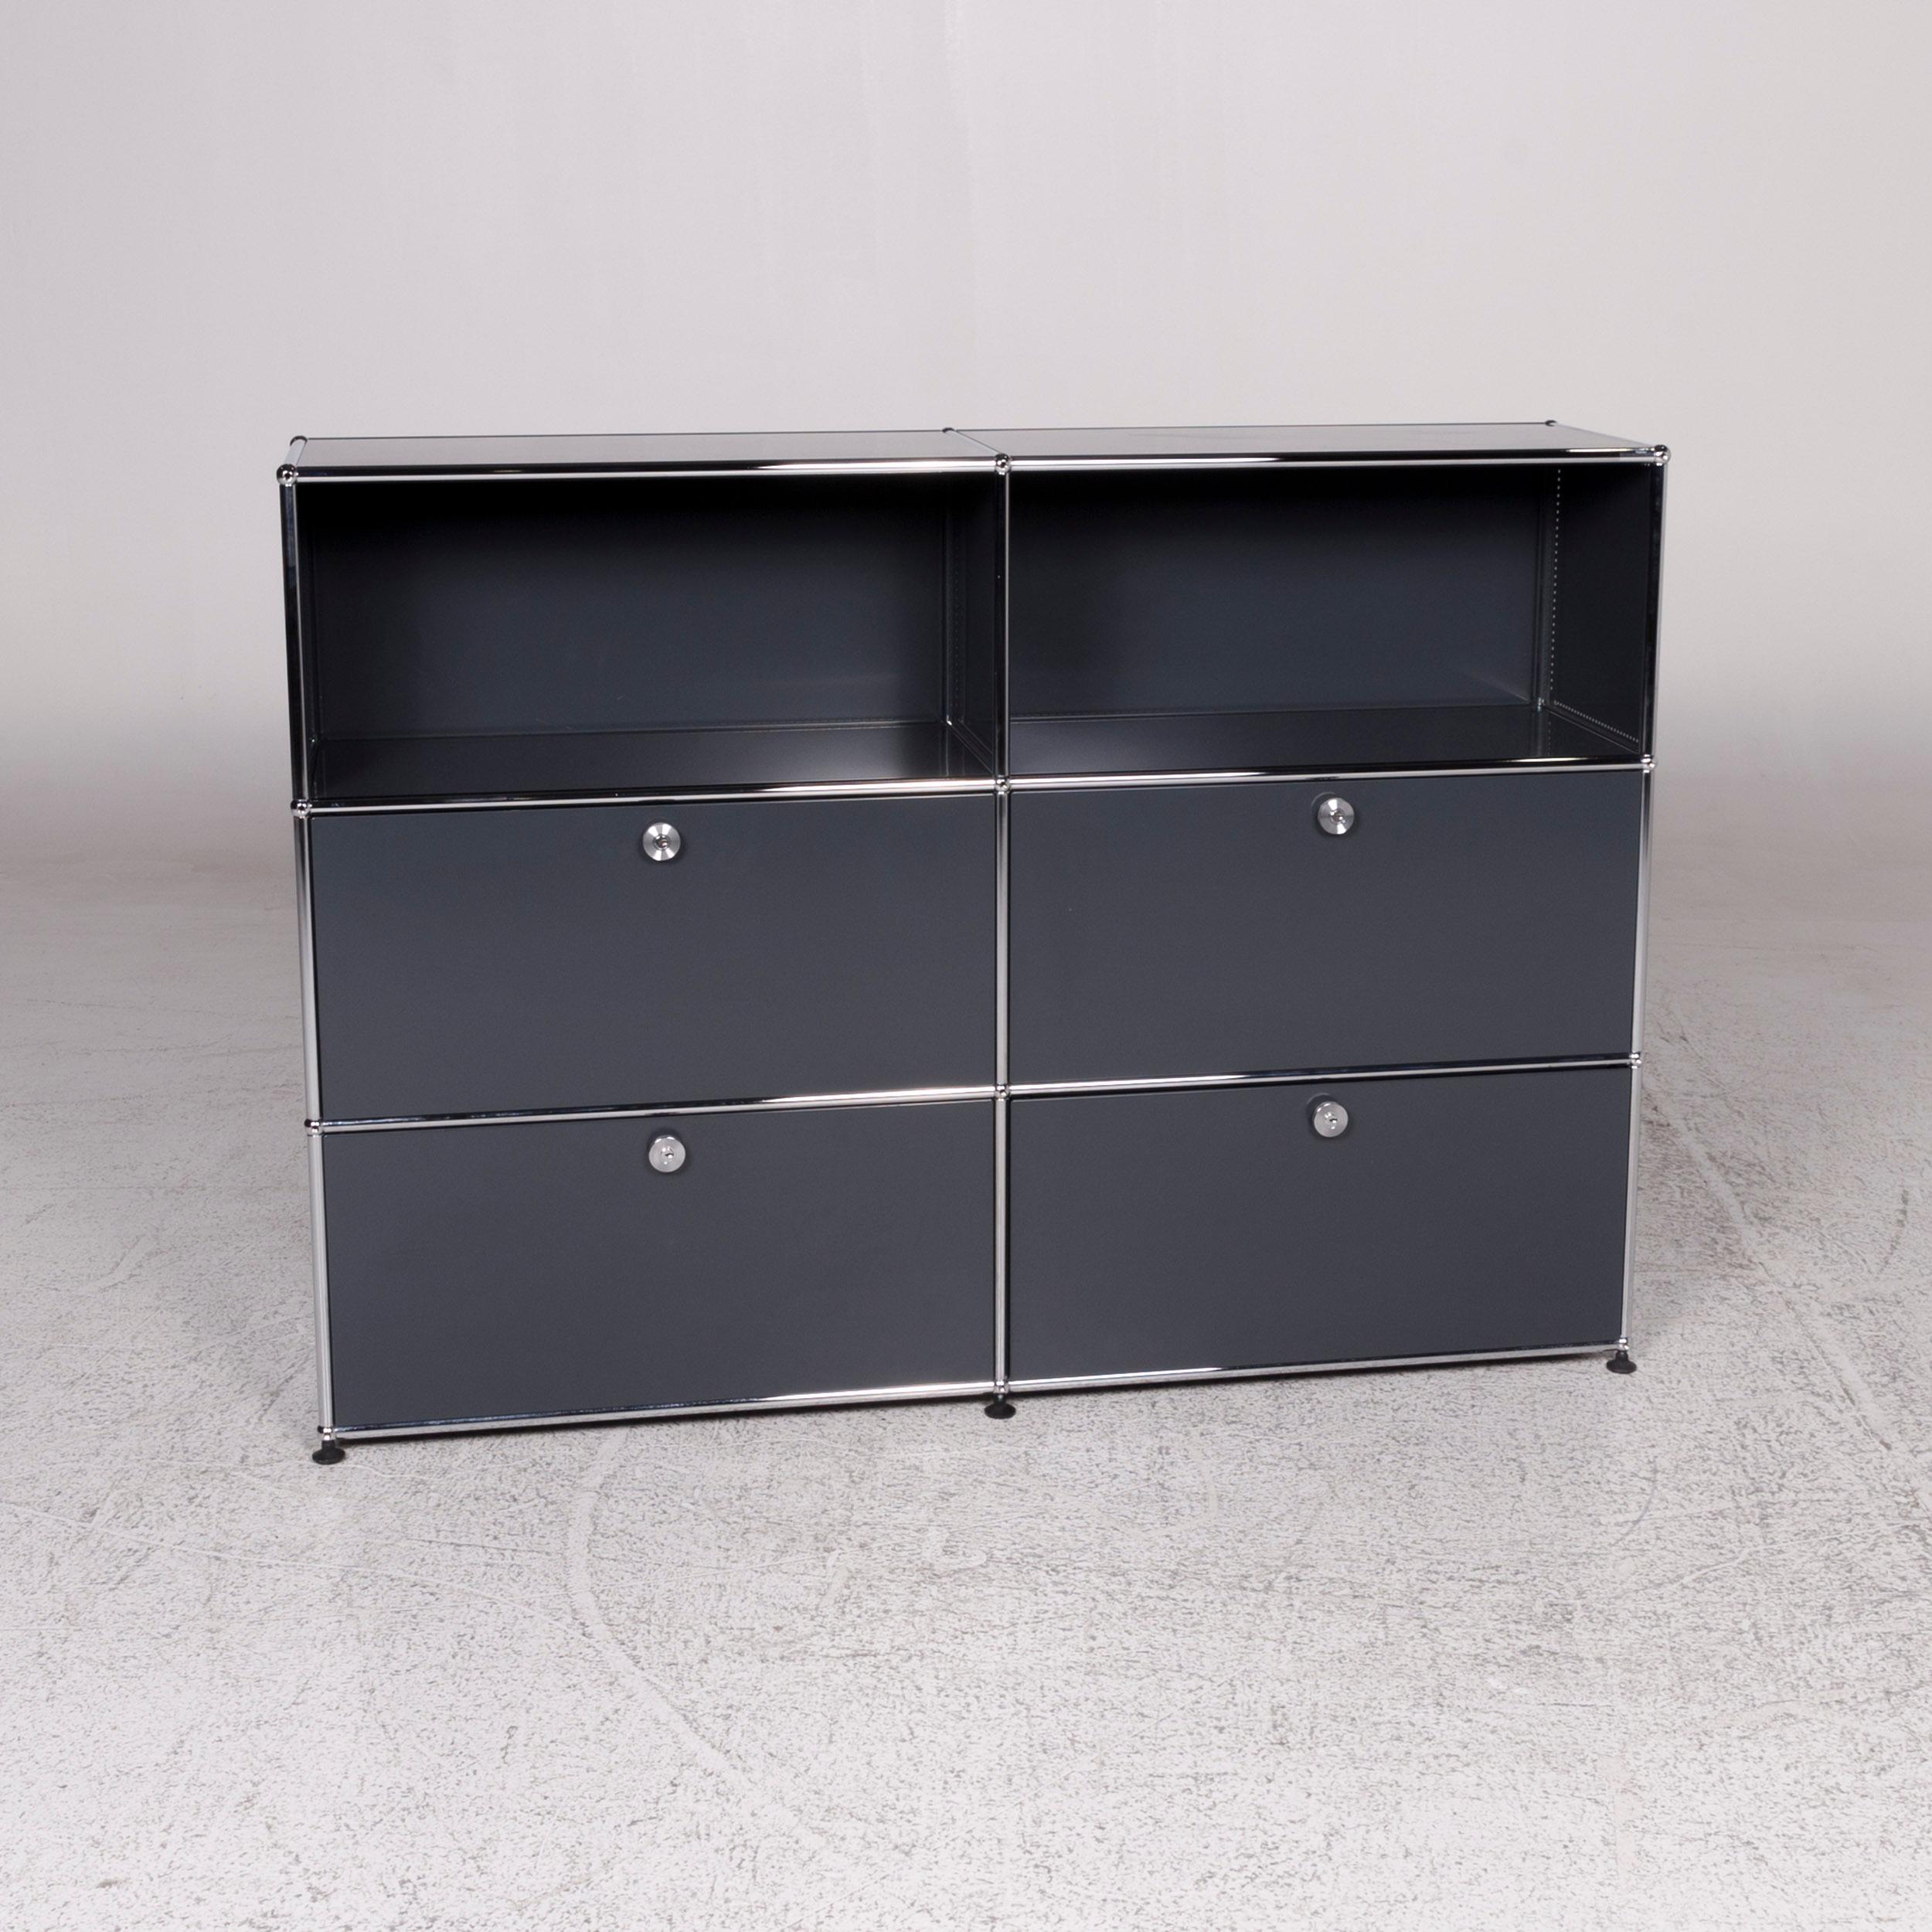 We bring to you an Usm Haller metal sideboard shelf gray 4 drawers.
   
 
 Product measurements in centimeters:
 
 Depth 38
Width 153
Height 109.





  